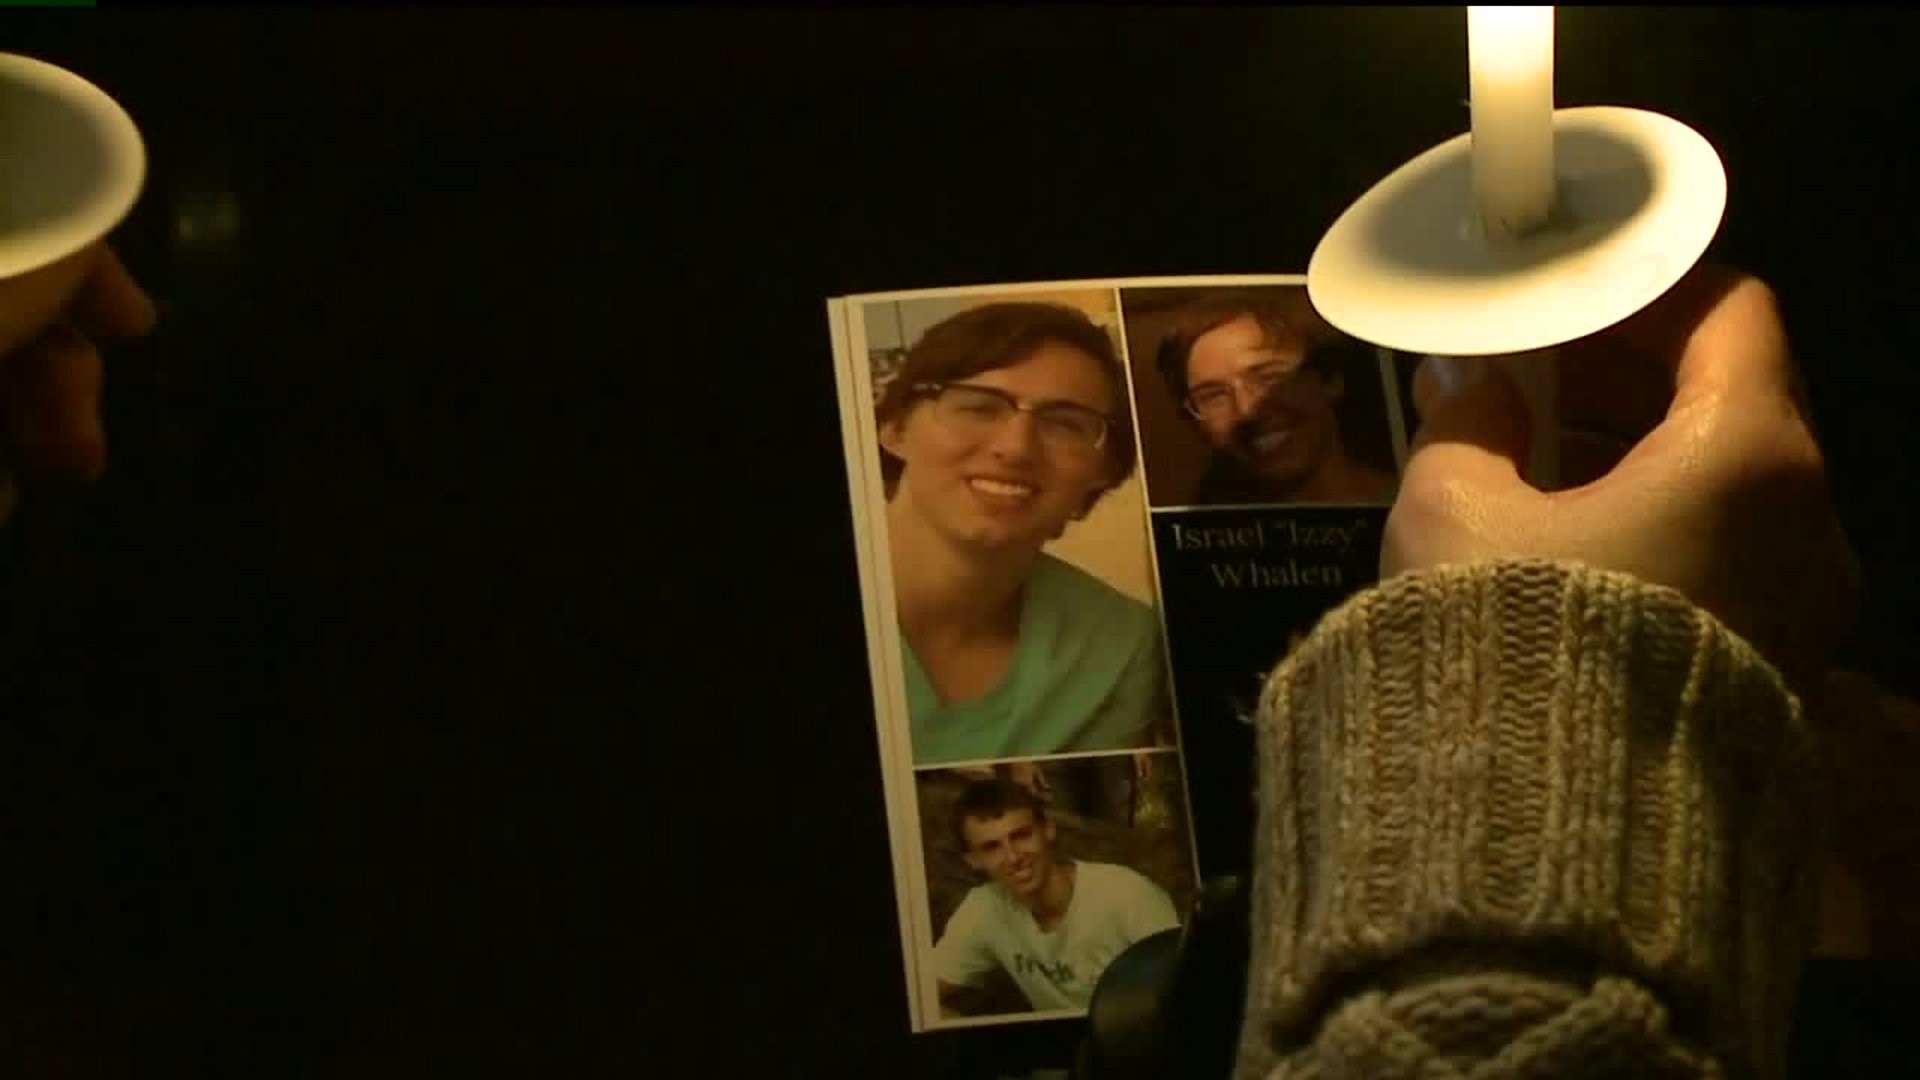 Vigil Held For Israel "Izzy" Whalen As Search Goes Into Third Week